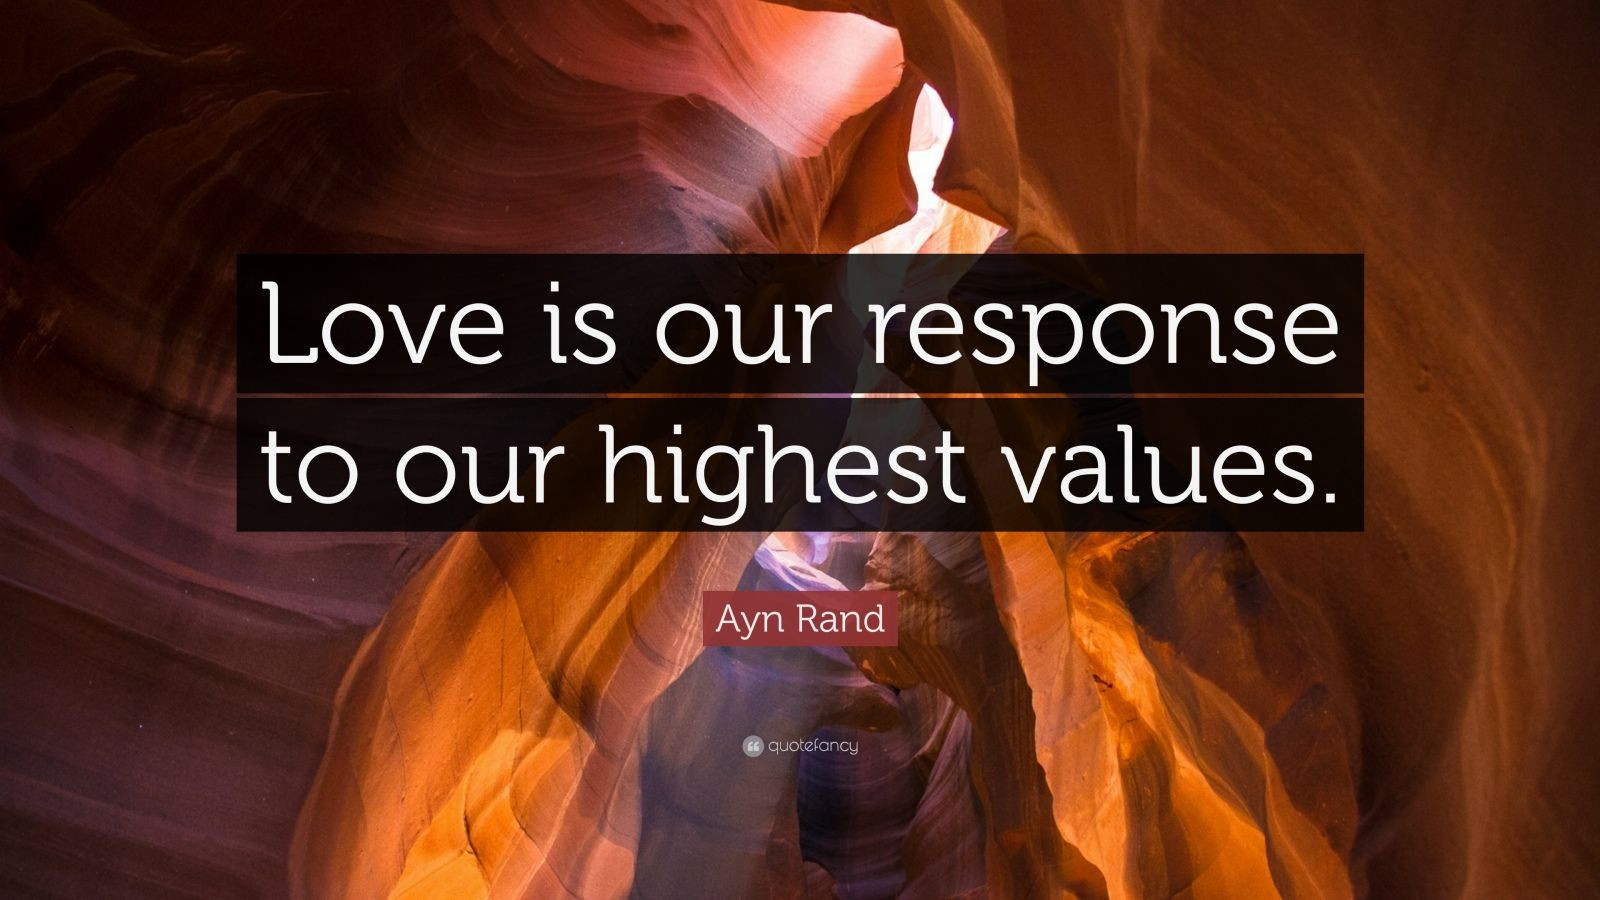 Ayn Rand Love Quotes
 Ayn Rand Quote “Love is our response to our highest